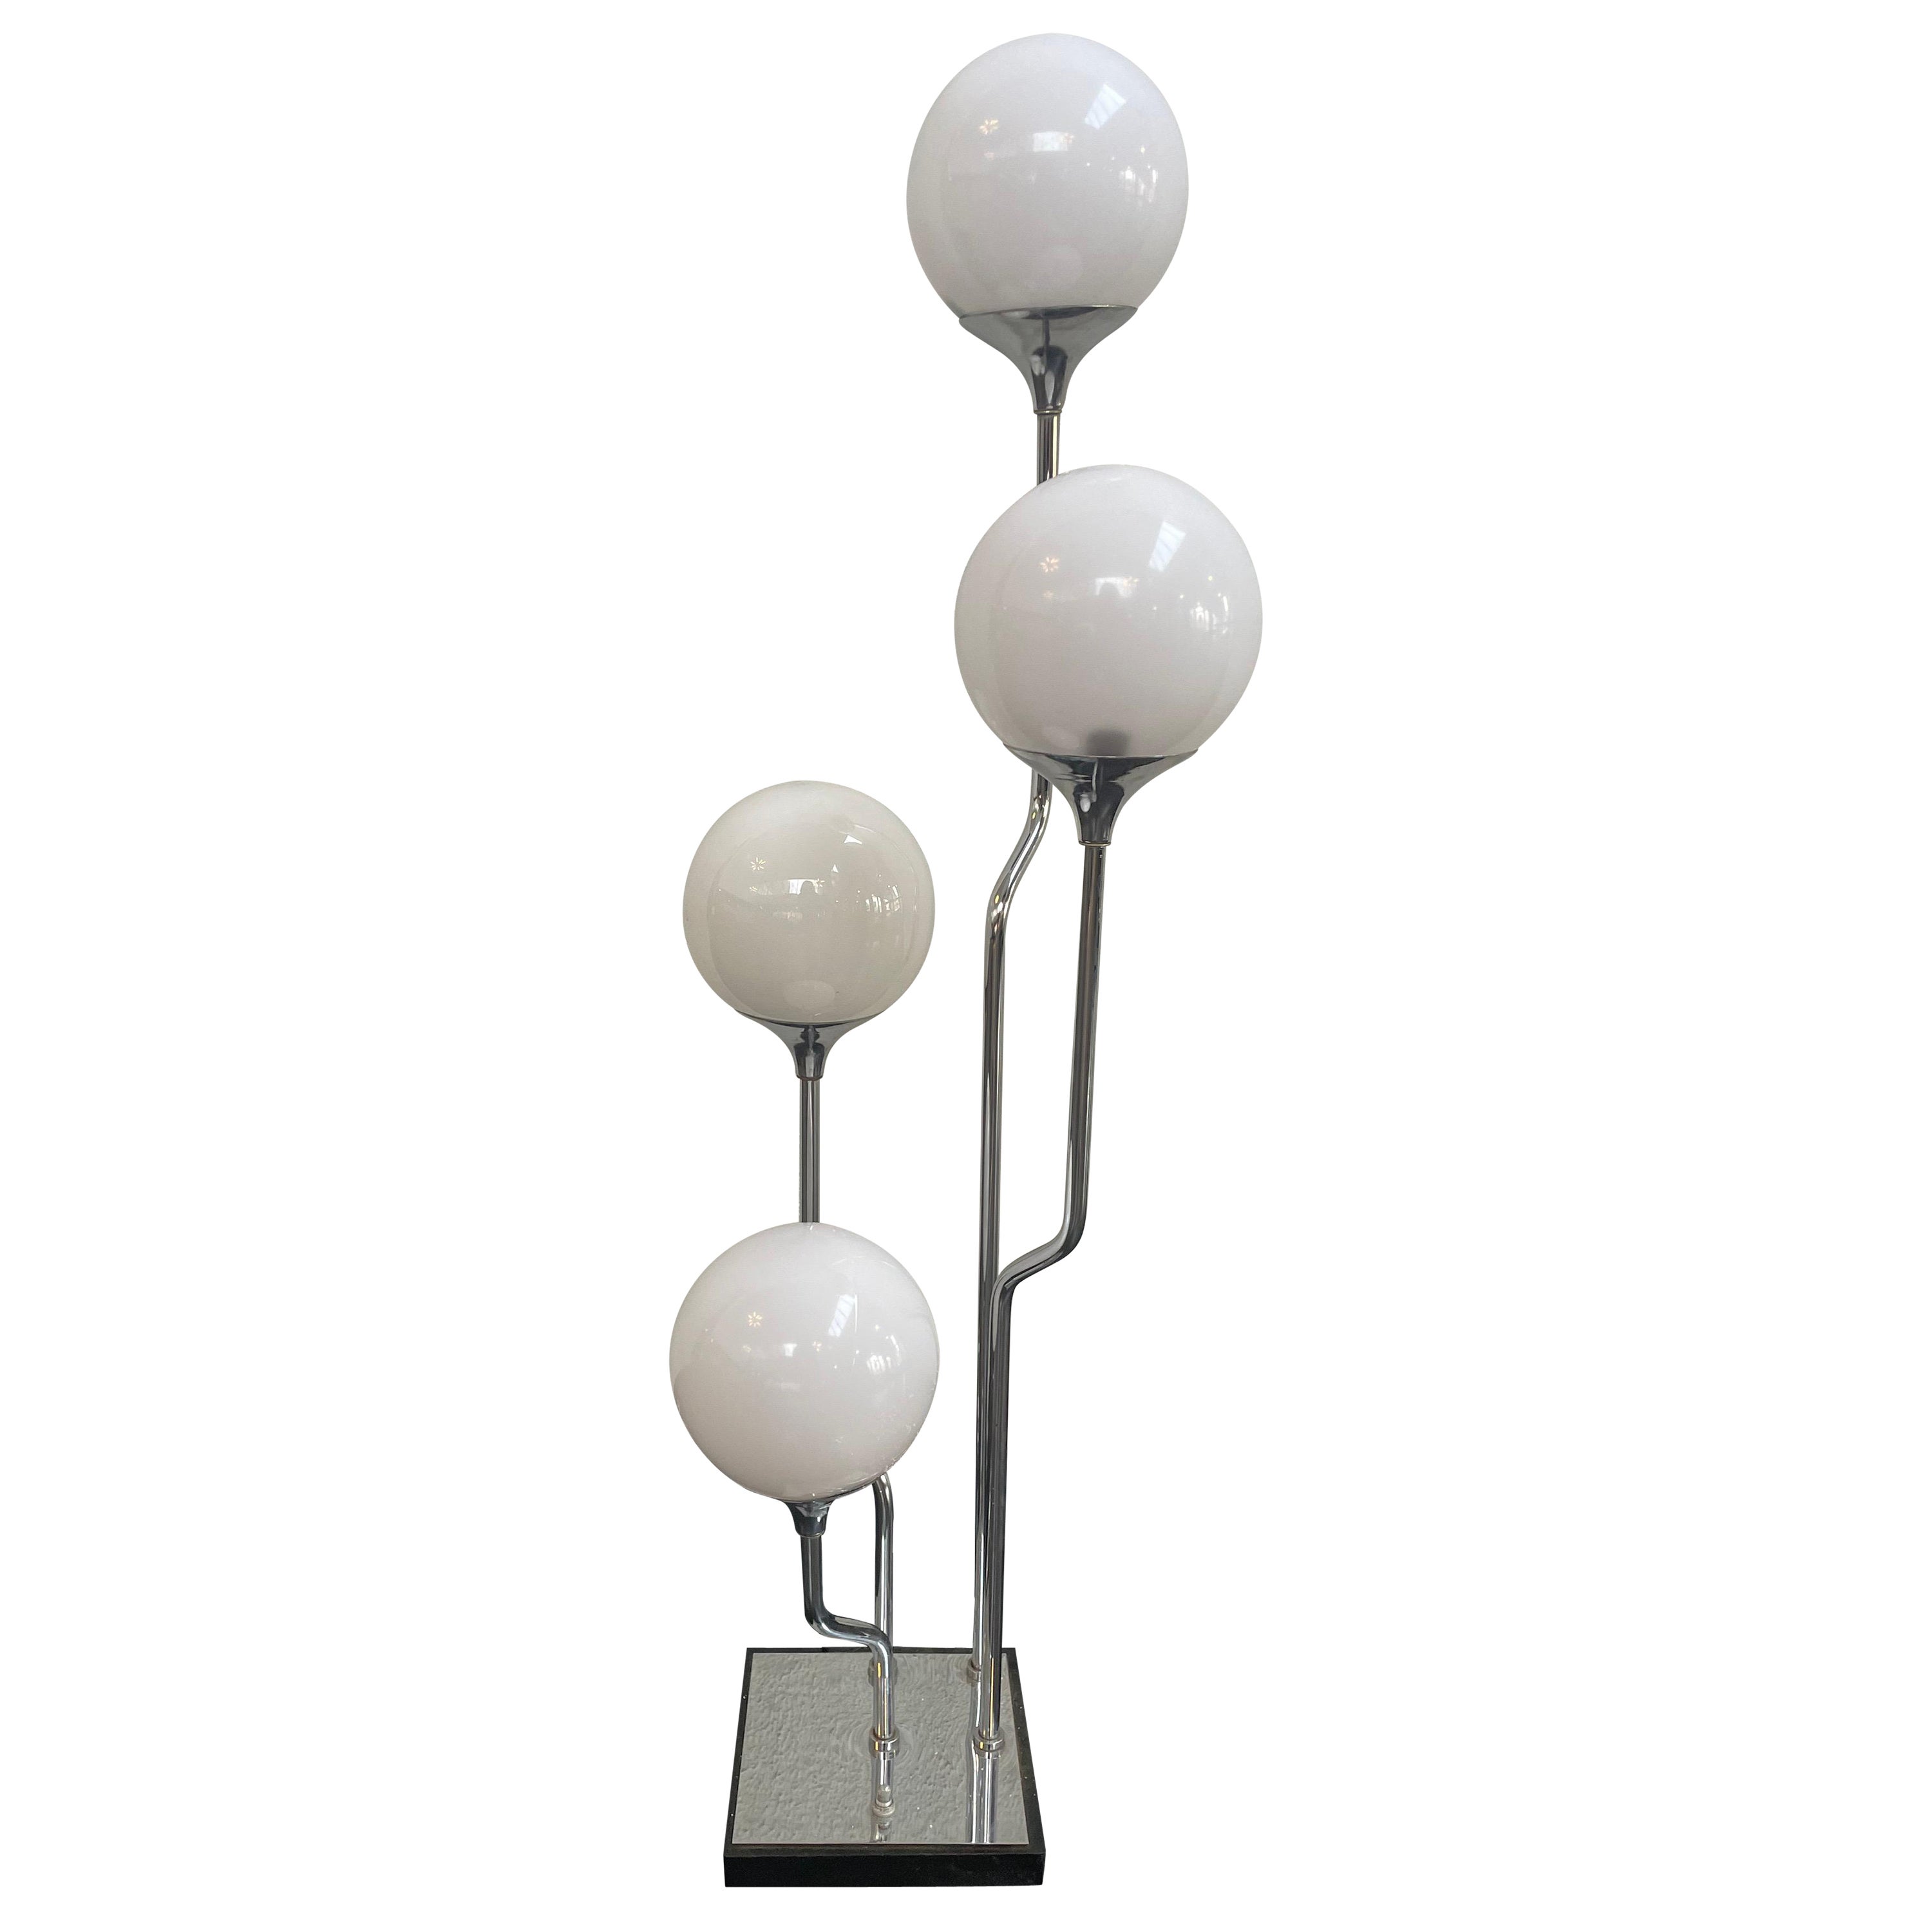 1970s Mod Chrome Table Lamp with 4 Globes, 2 Available